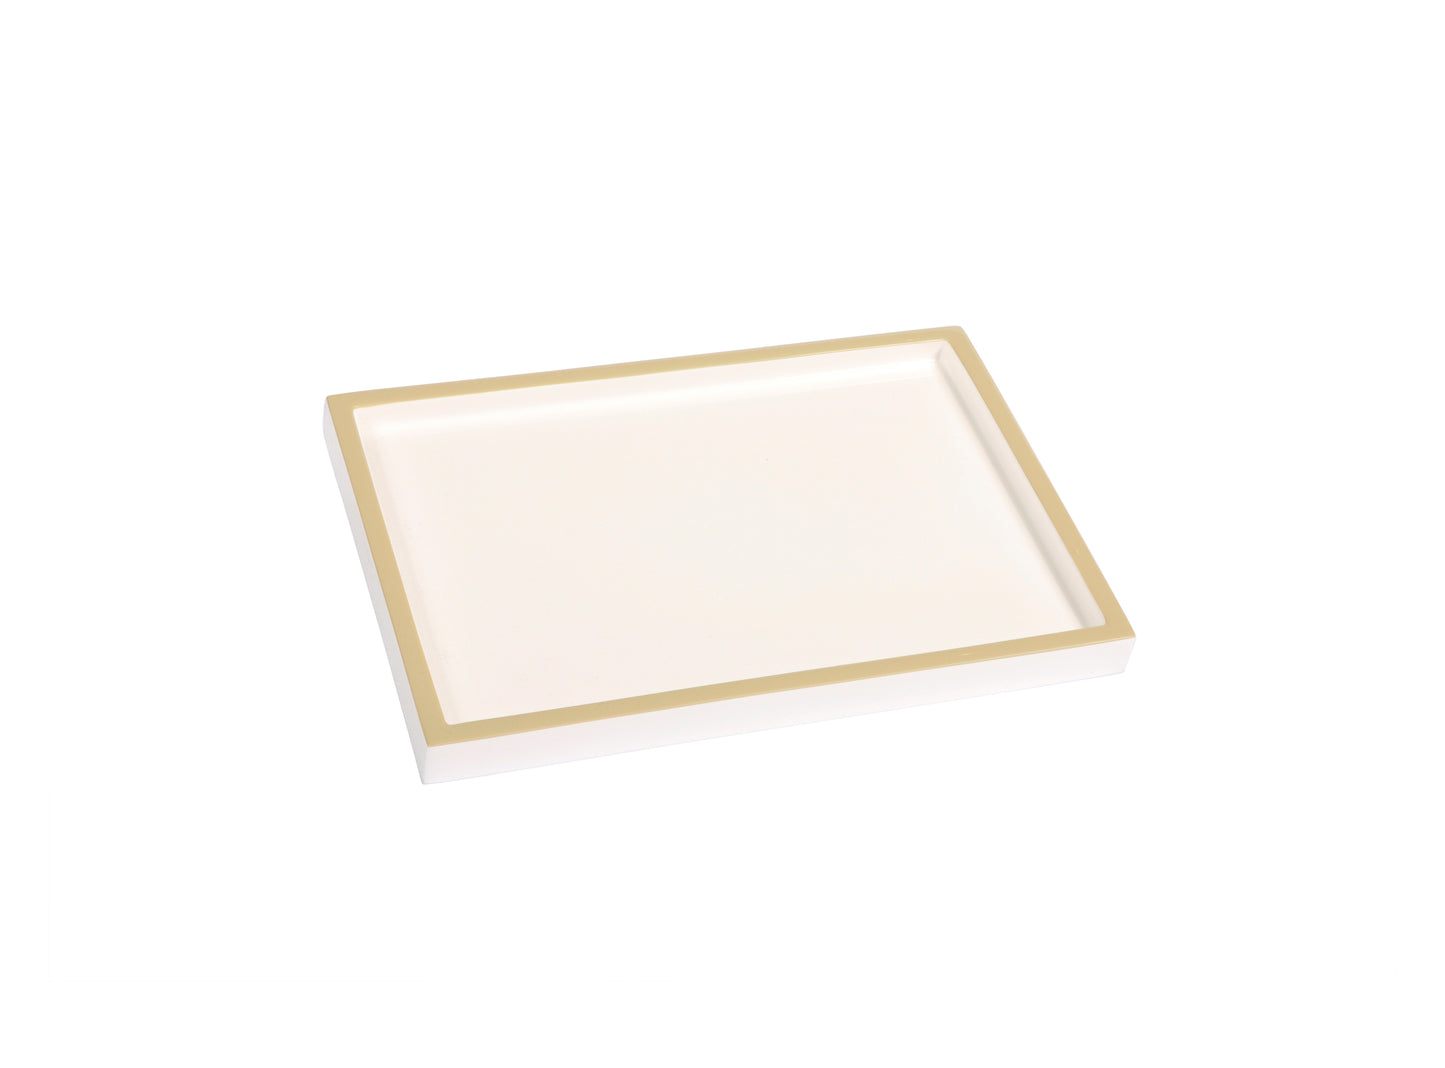 Lacquer Vanity Tray White and Taupe Joanna Wood Shop